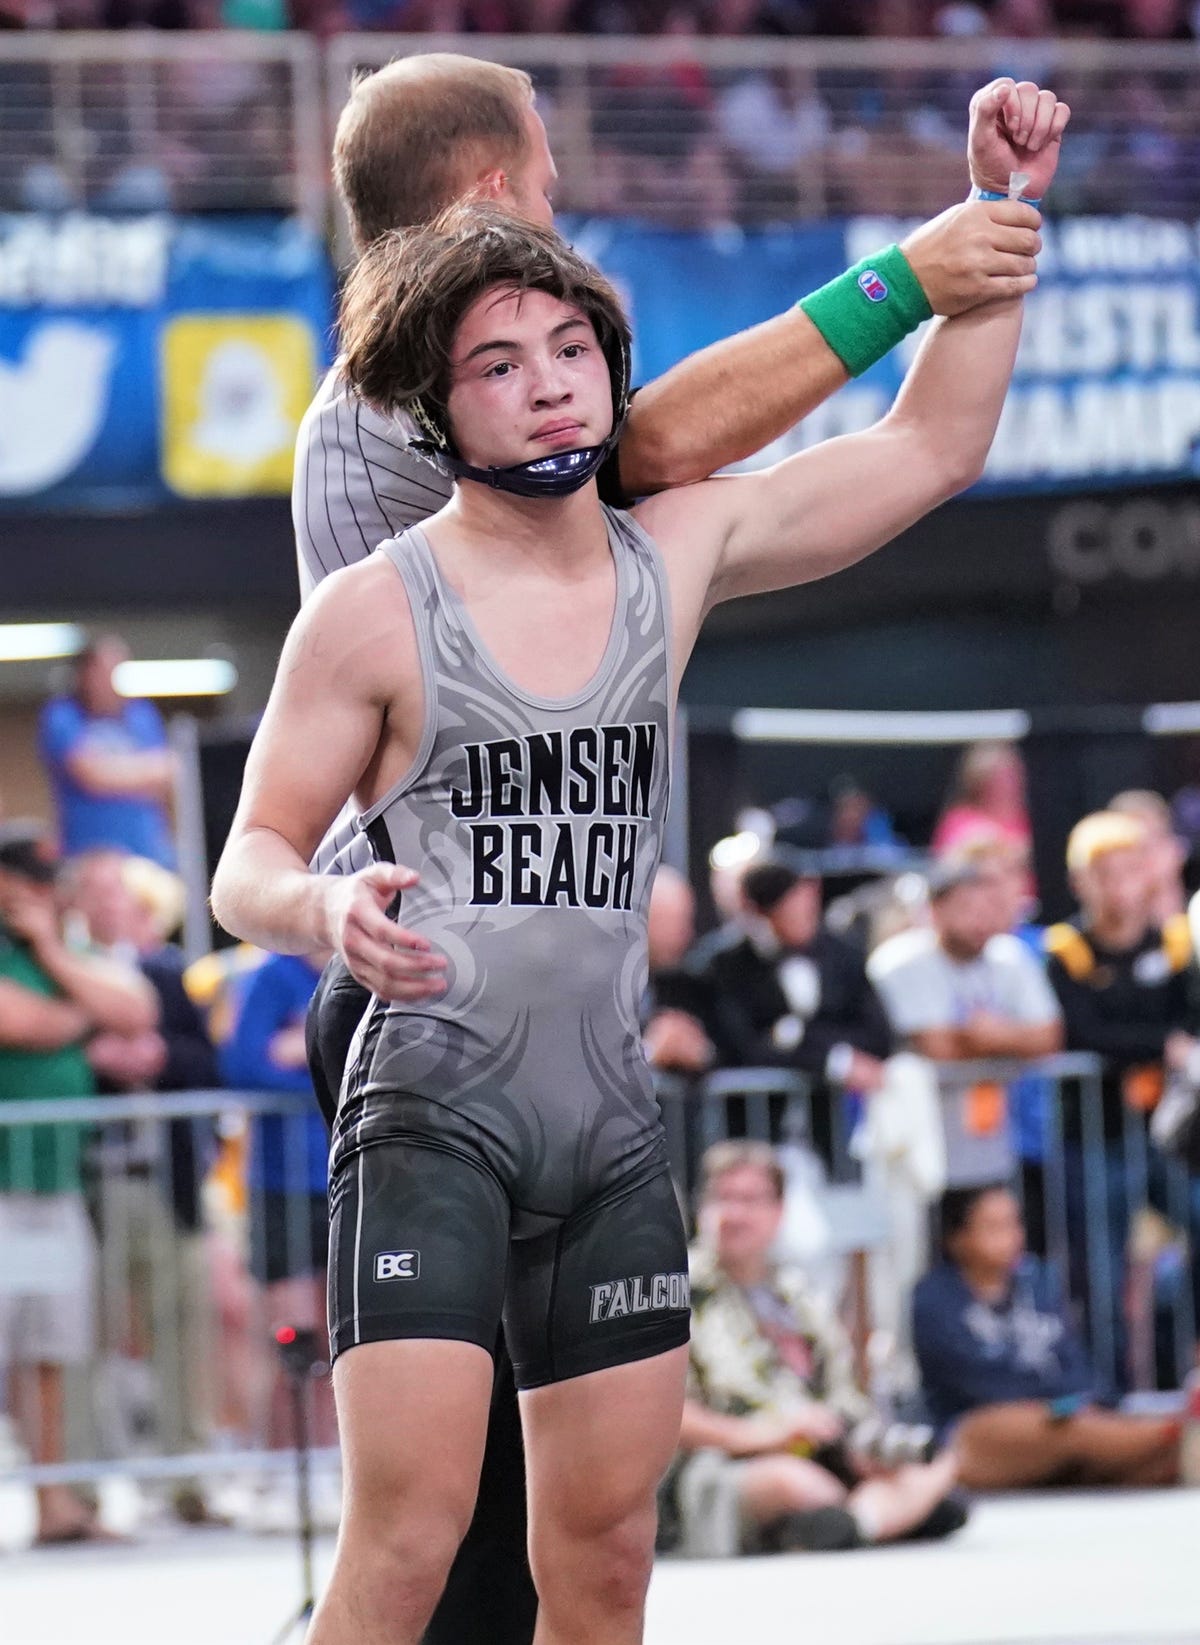 Jensen Beach Wrestling: Seeking Third State Title with Mix of Young and Experienced Wrestlers